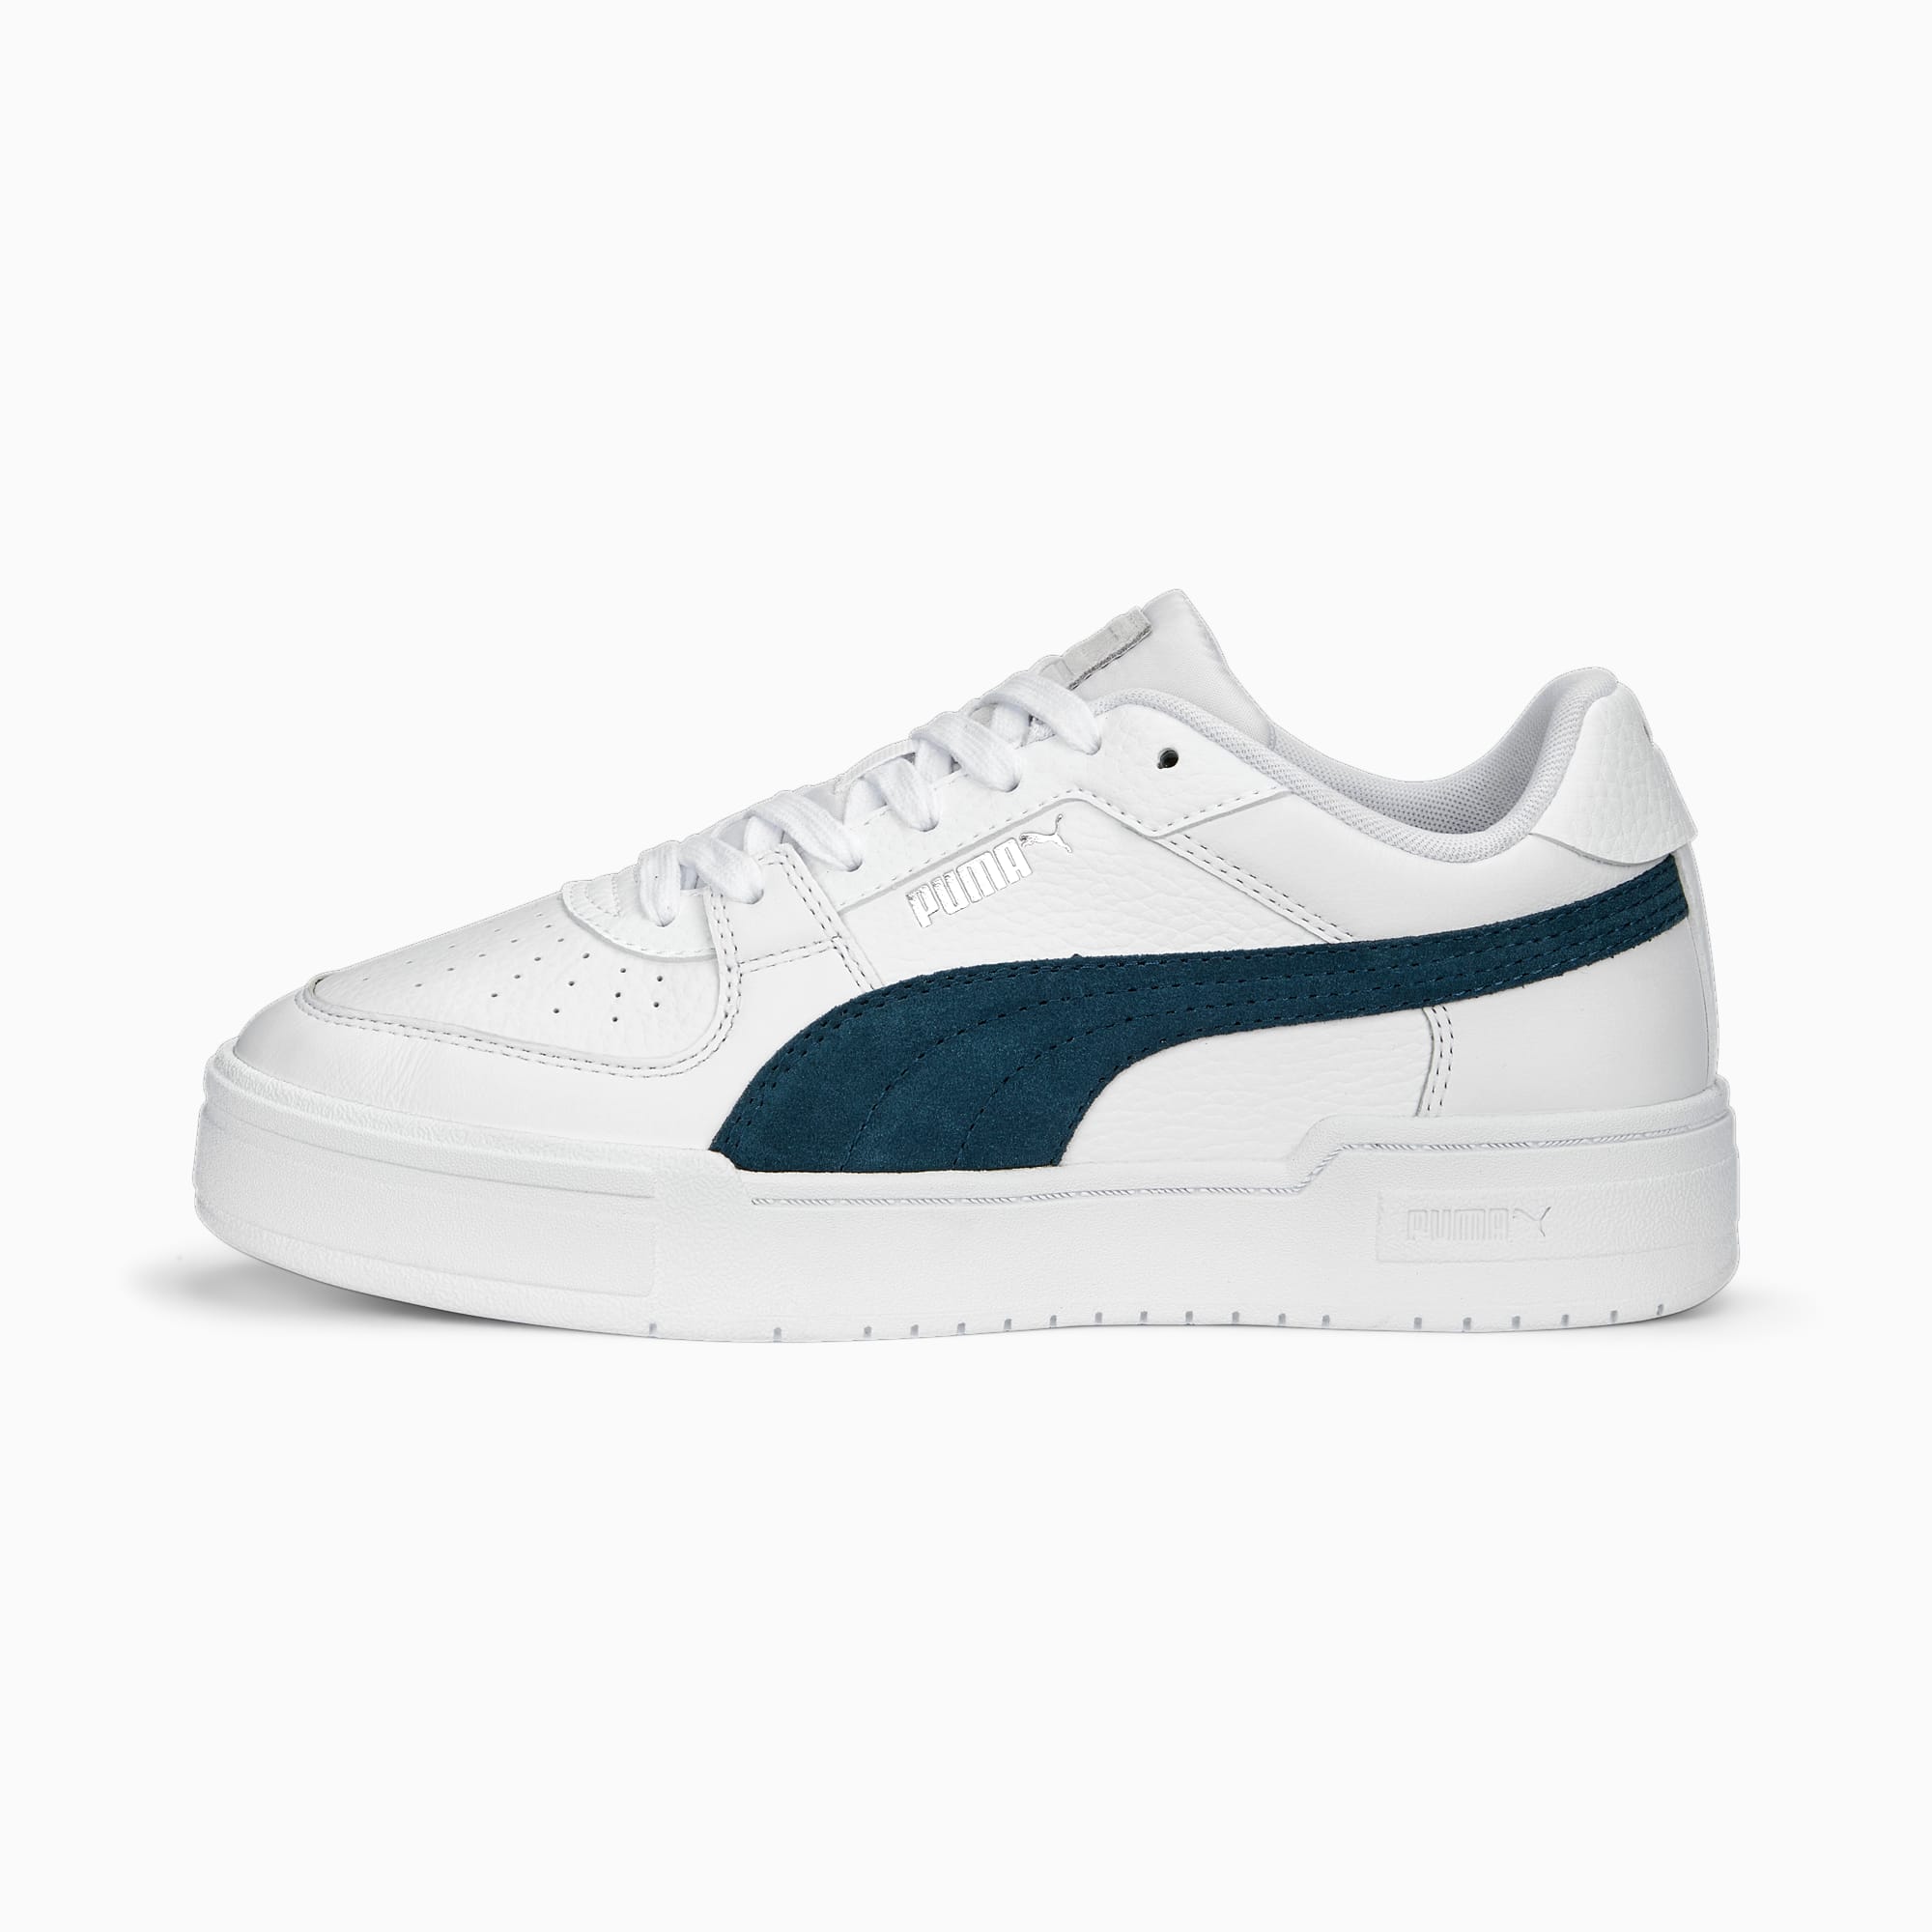 PUMA Chaussure Sneakers CA Pro Suede FS Pour Homme, Blanc